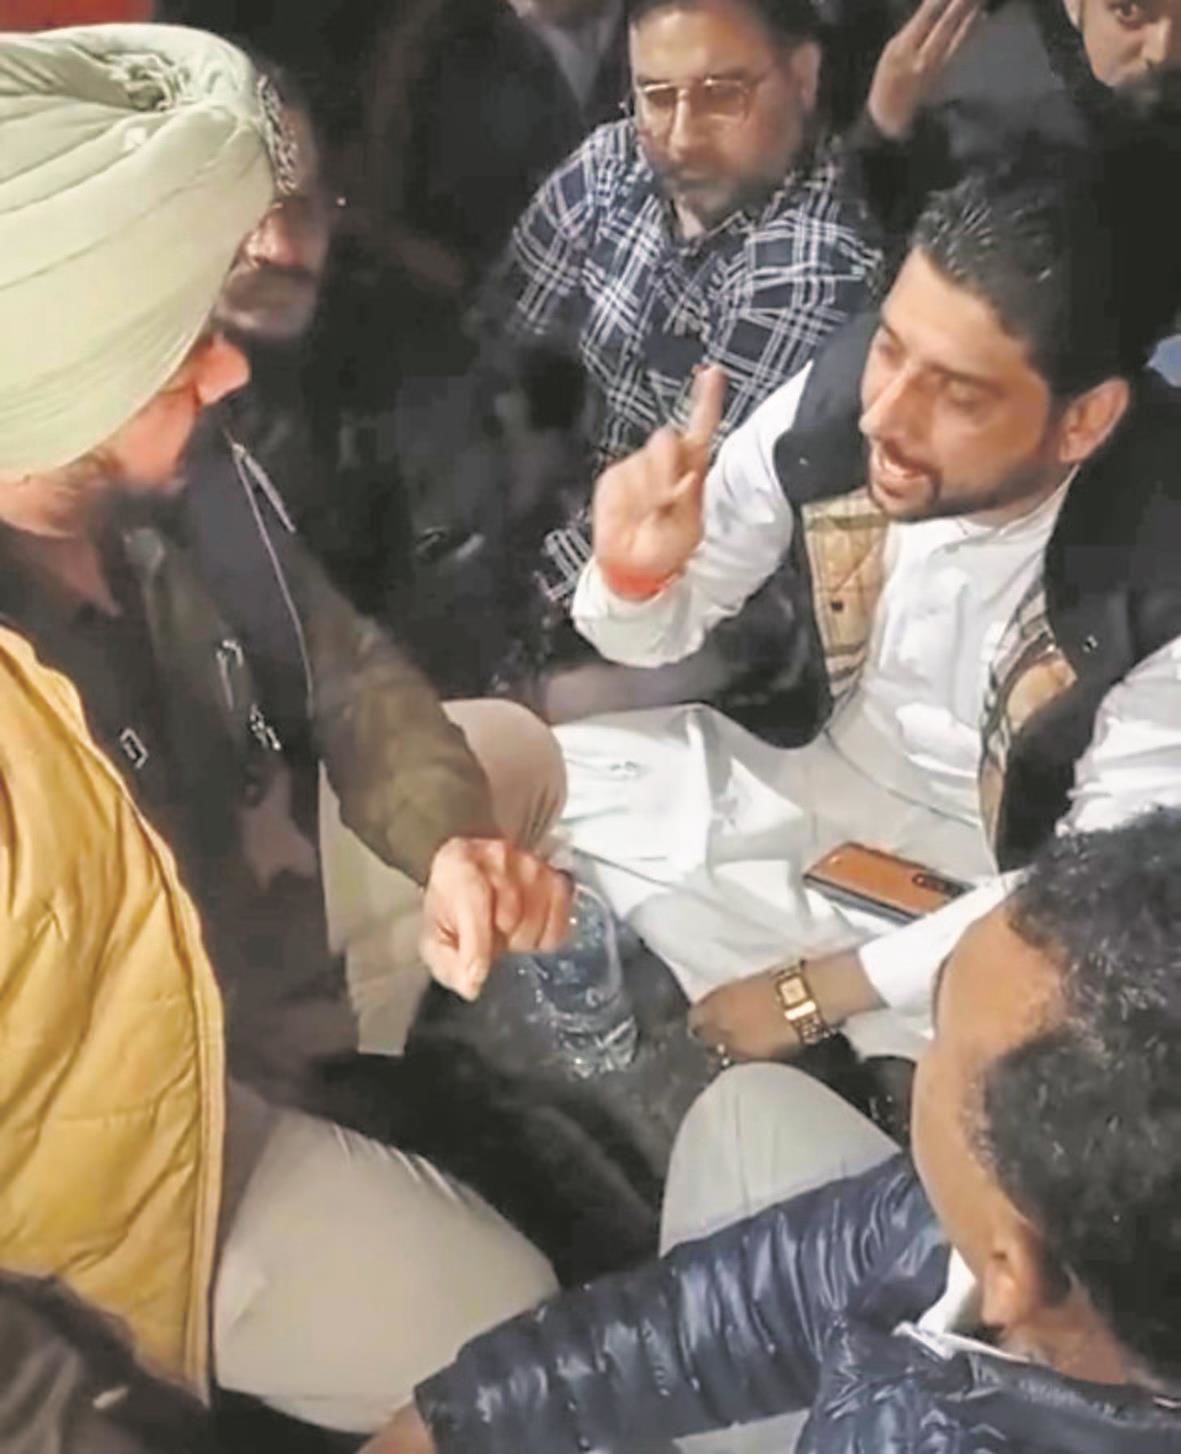 Jalandhar cops swing into action, arrest five suspects from lottery shop